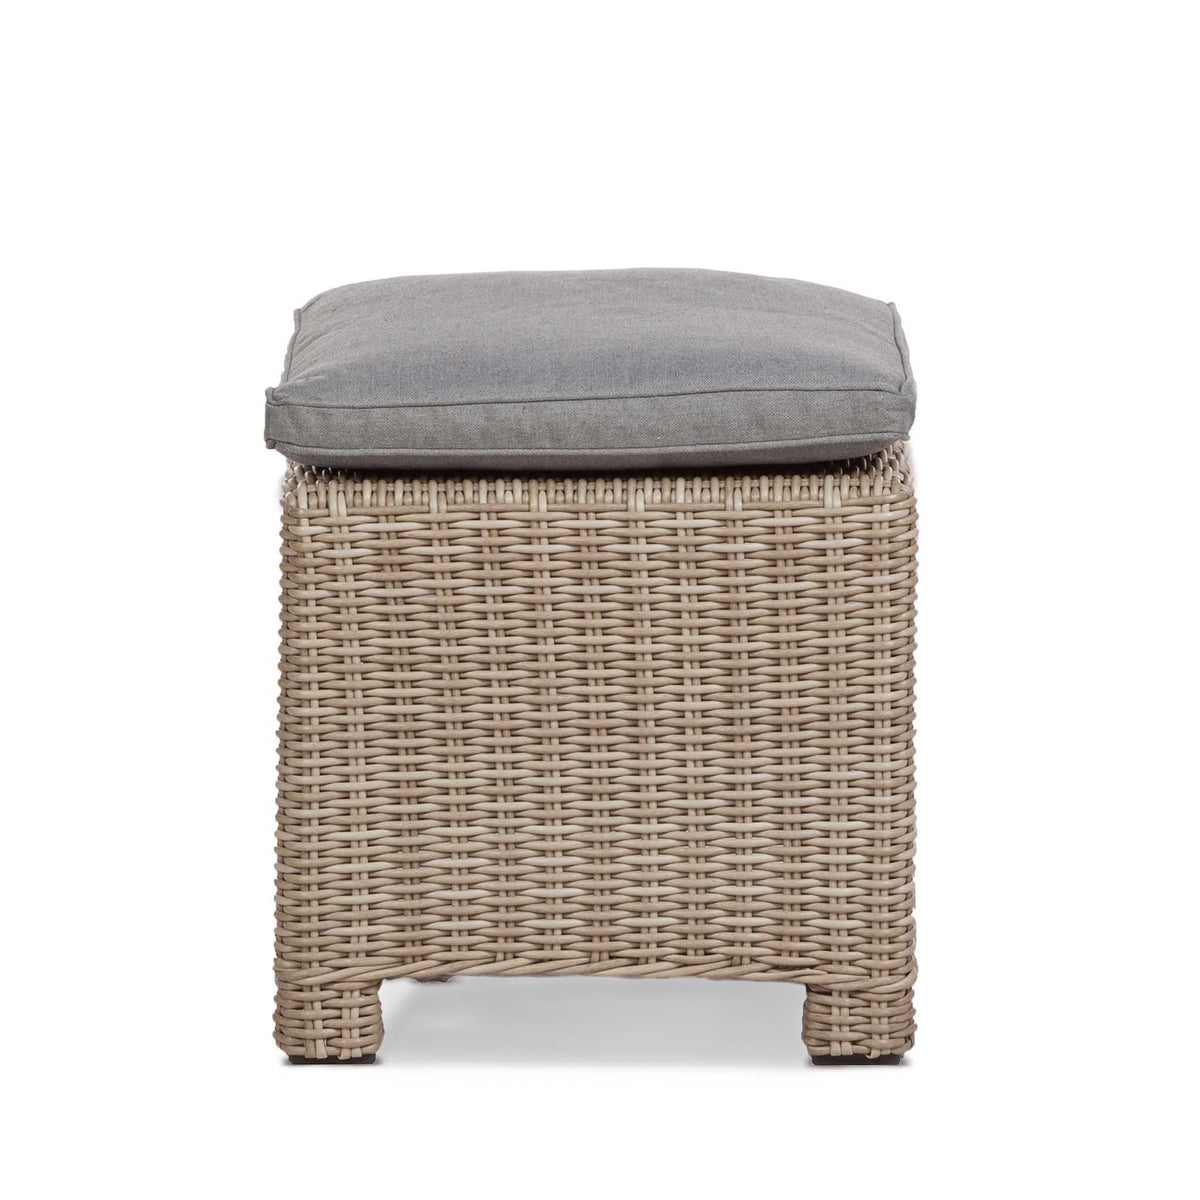 Wentworth Deluxe Rattan Corner Sofa Garden Lounge Set with Adjustable Table - Close up of Stool